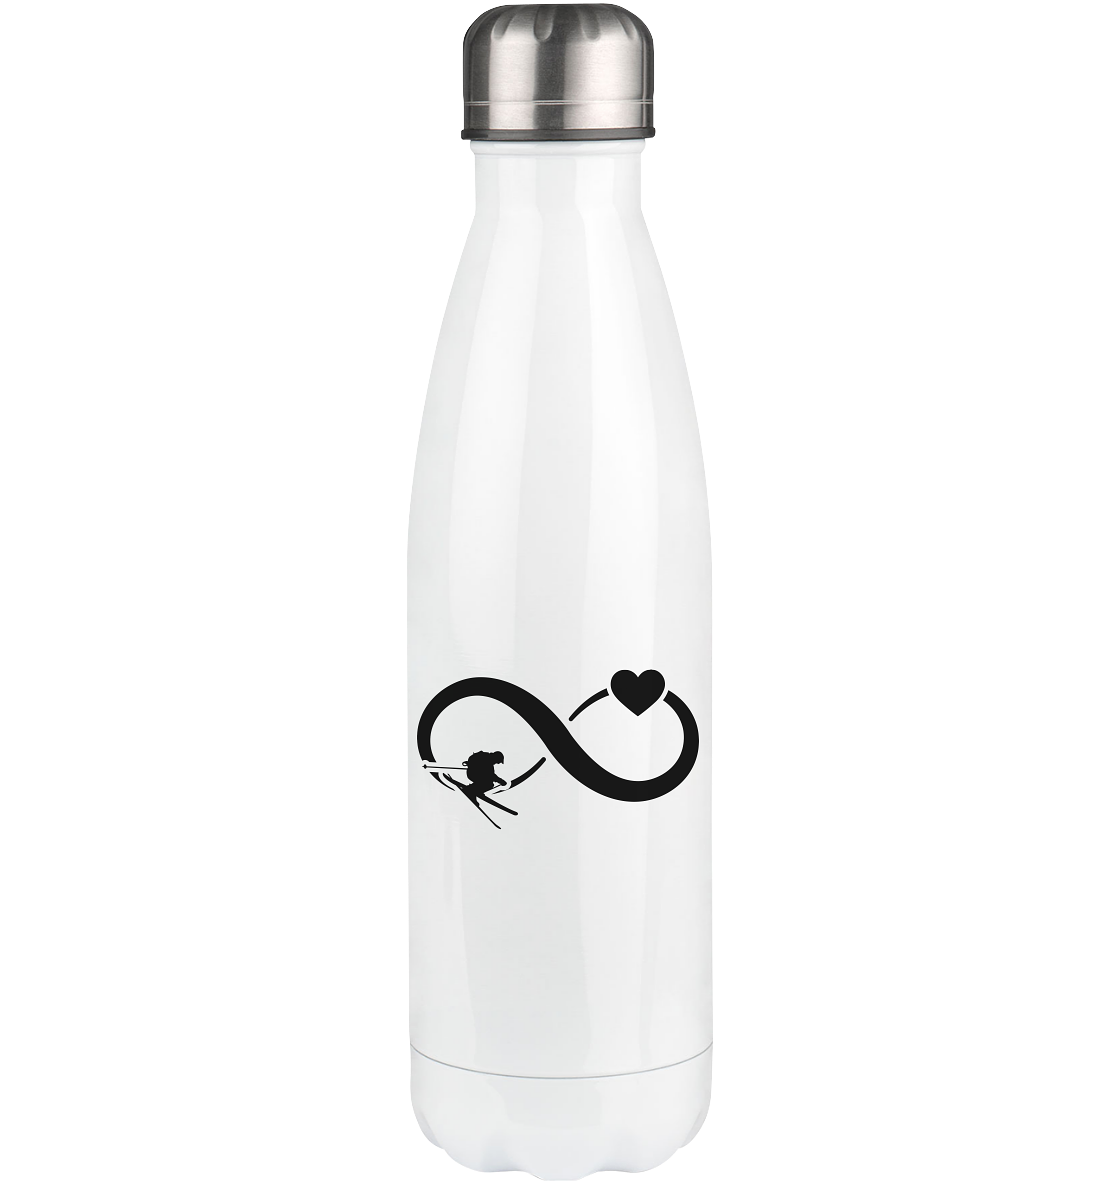 Infinity Heart and Skiing - Edelstahl Thermosflasche klettern ski 500ml